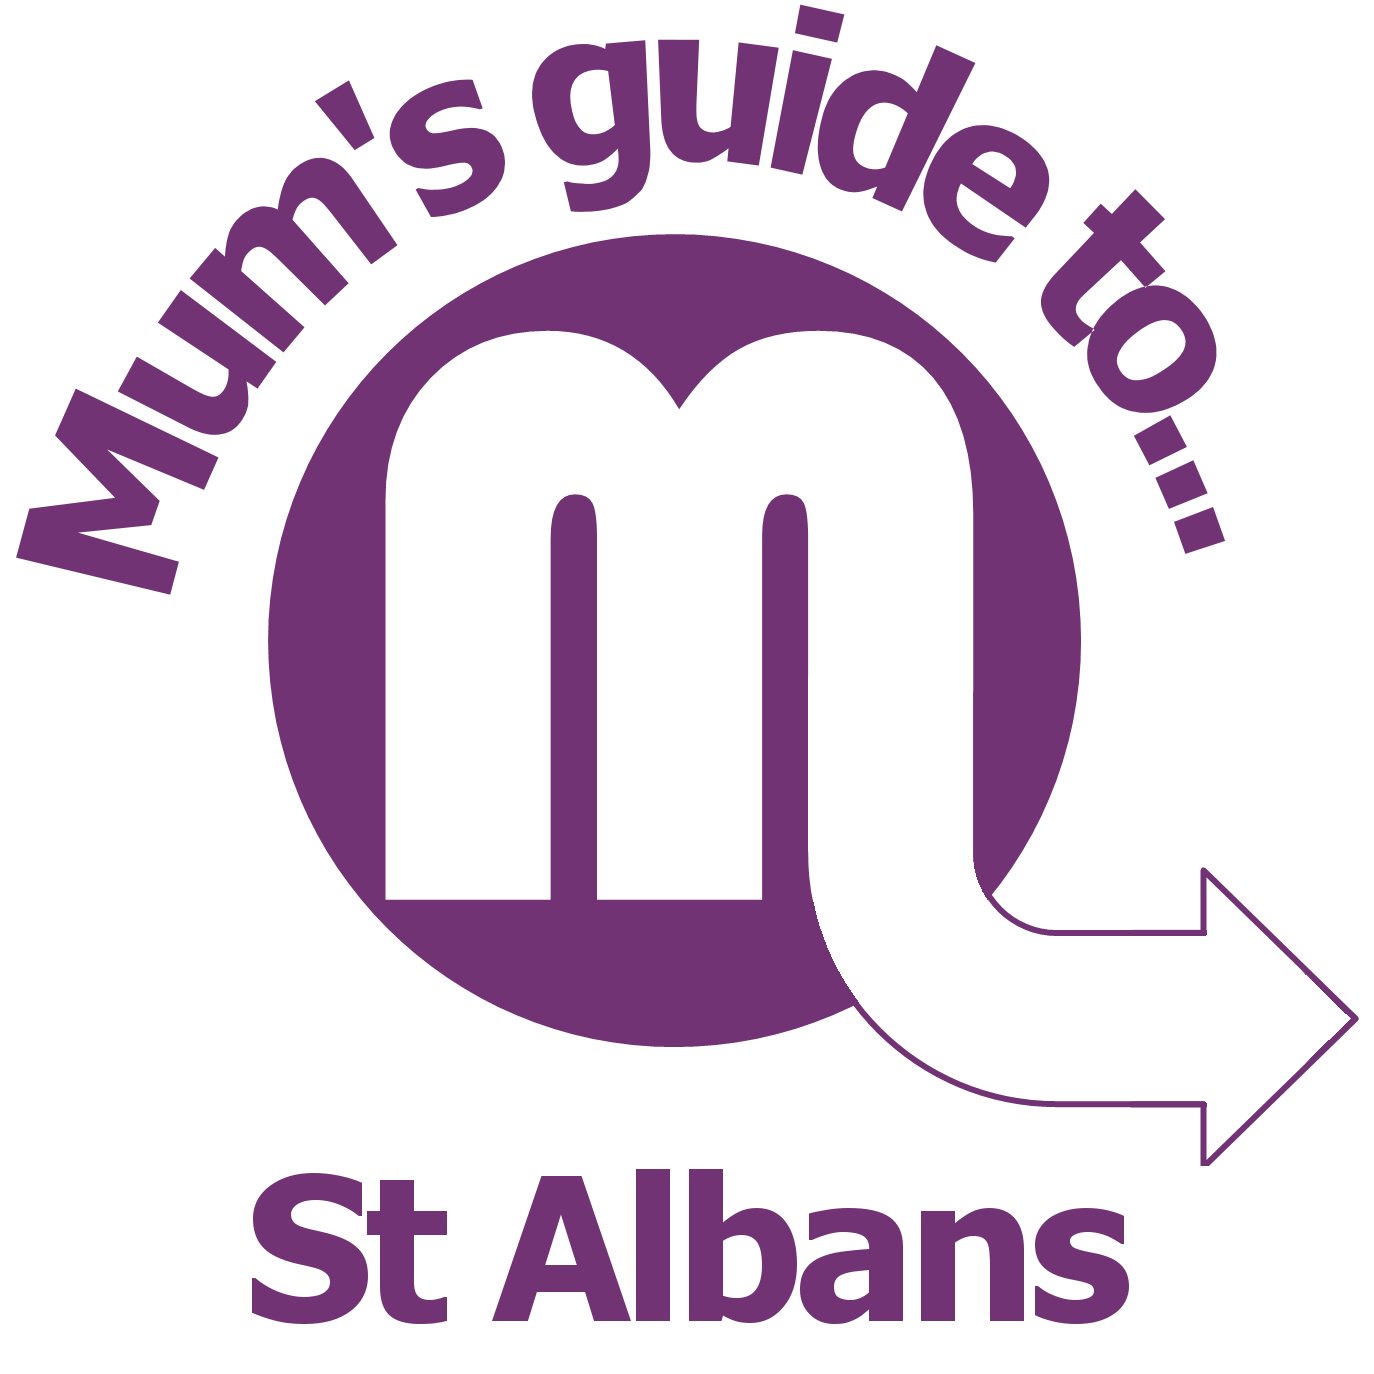 Mum's guide to St Albans